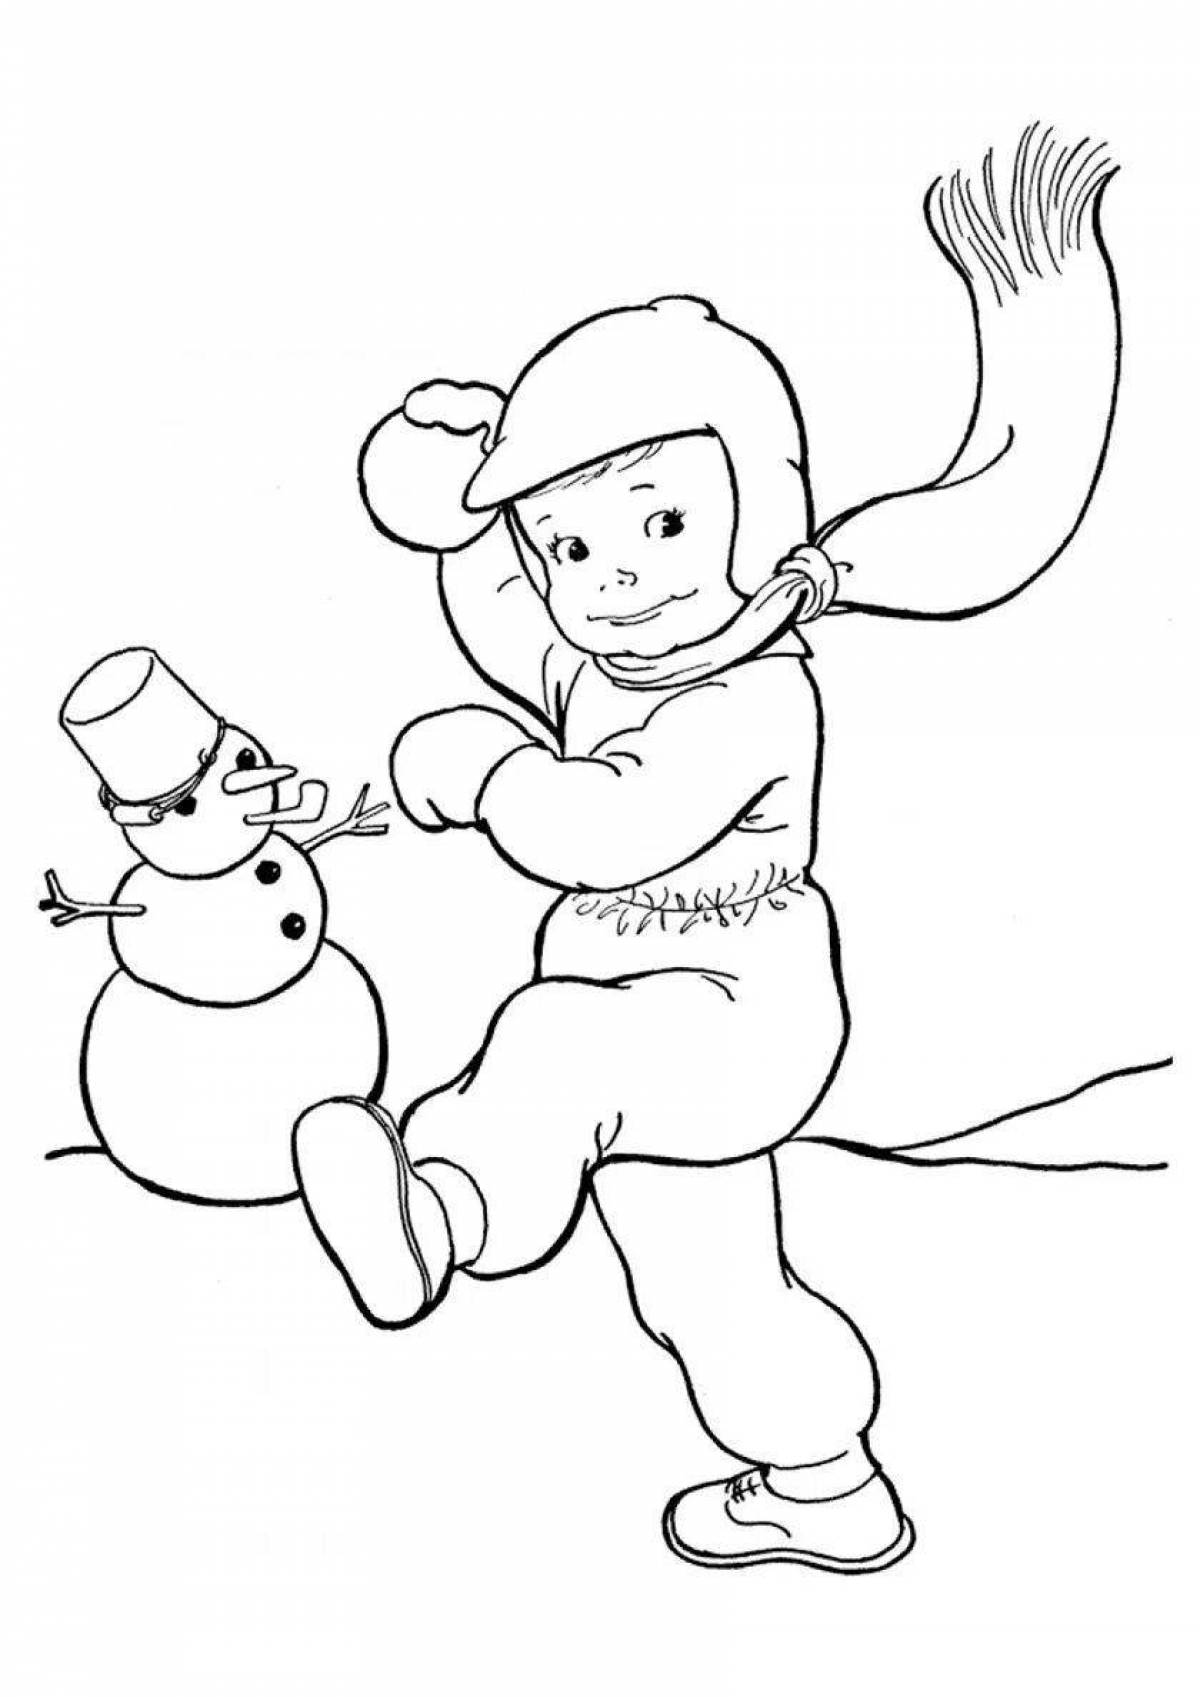 Exciting coloring book for kids outdoors in winter